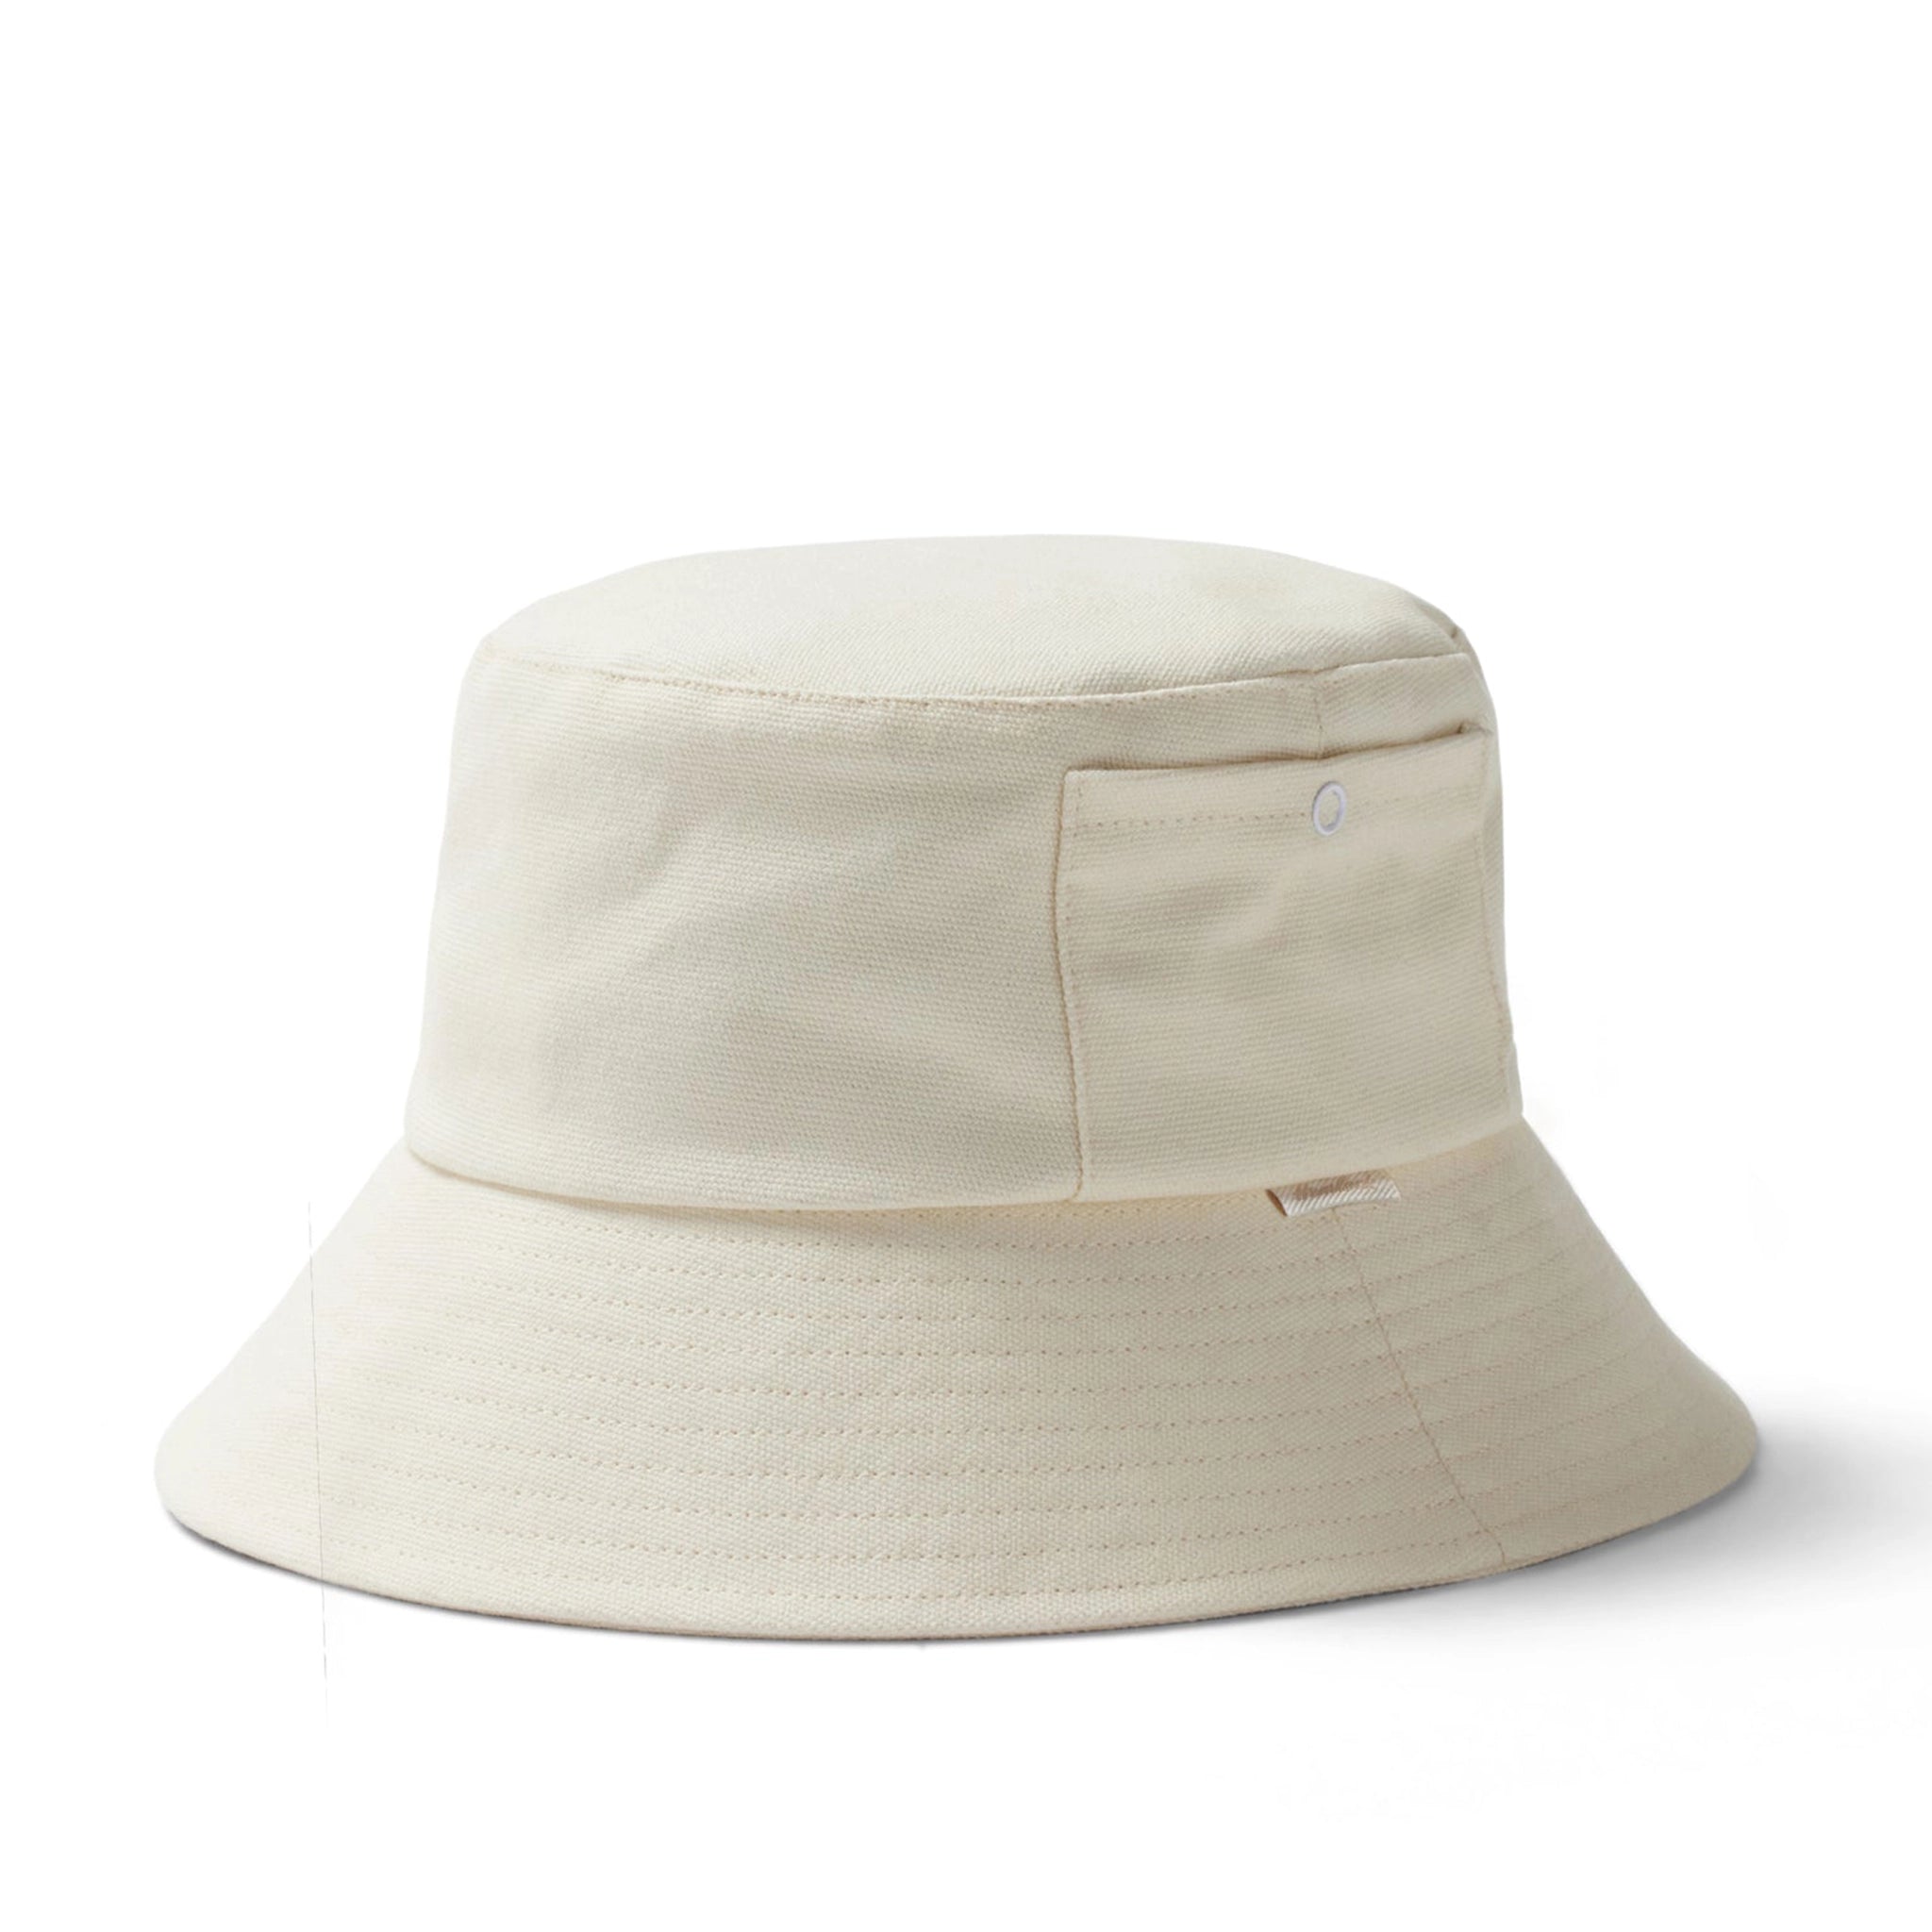 An ivory bucket hat with a small square pocket on the side.